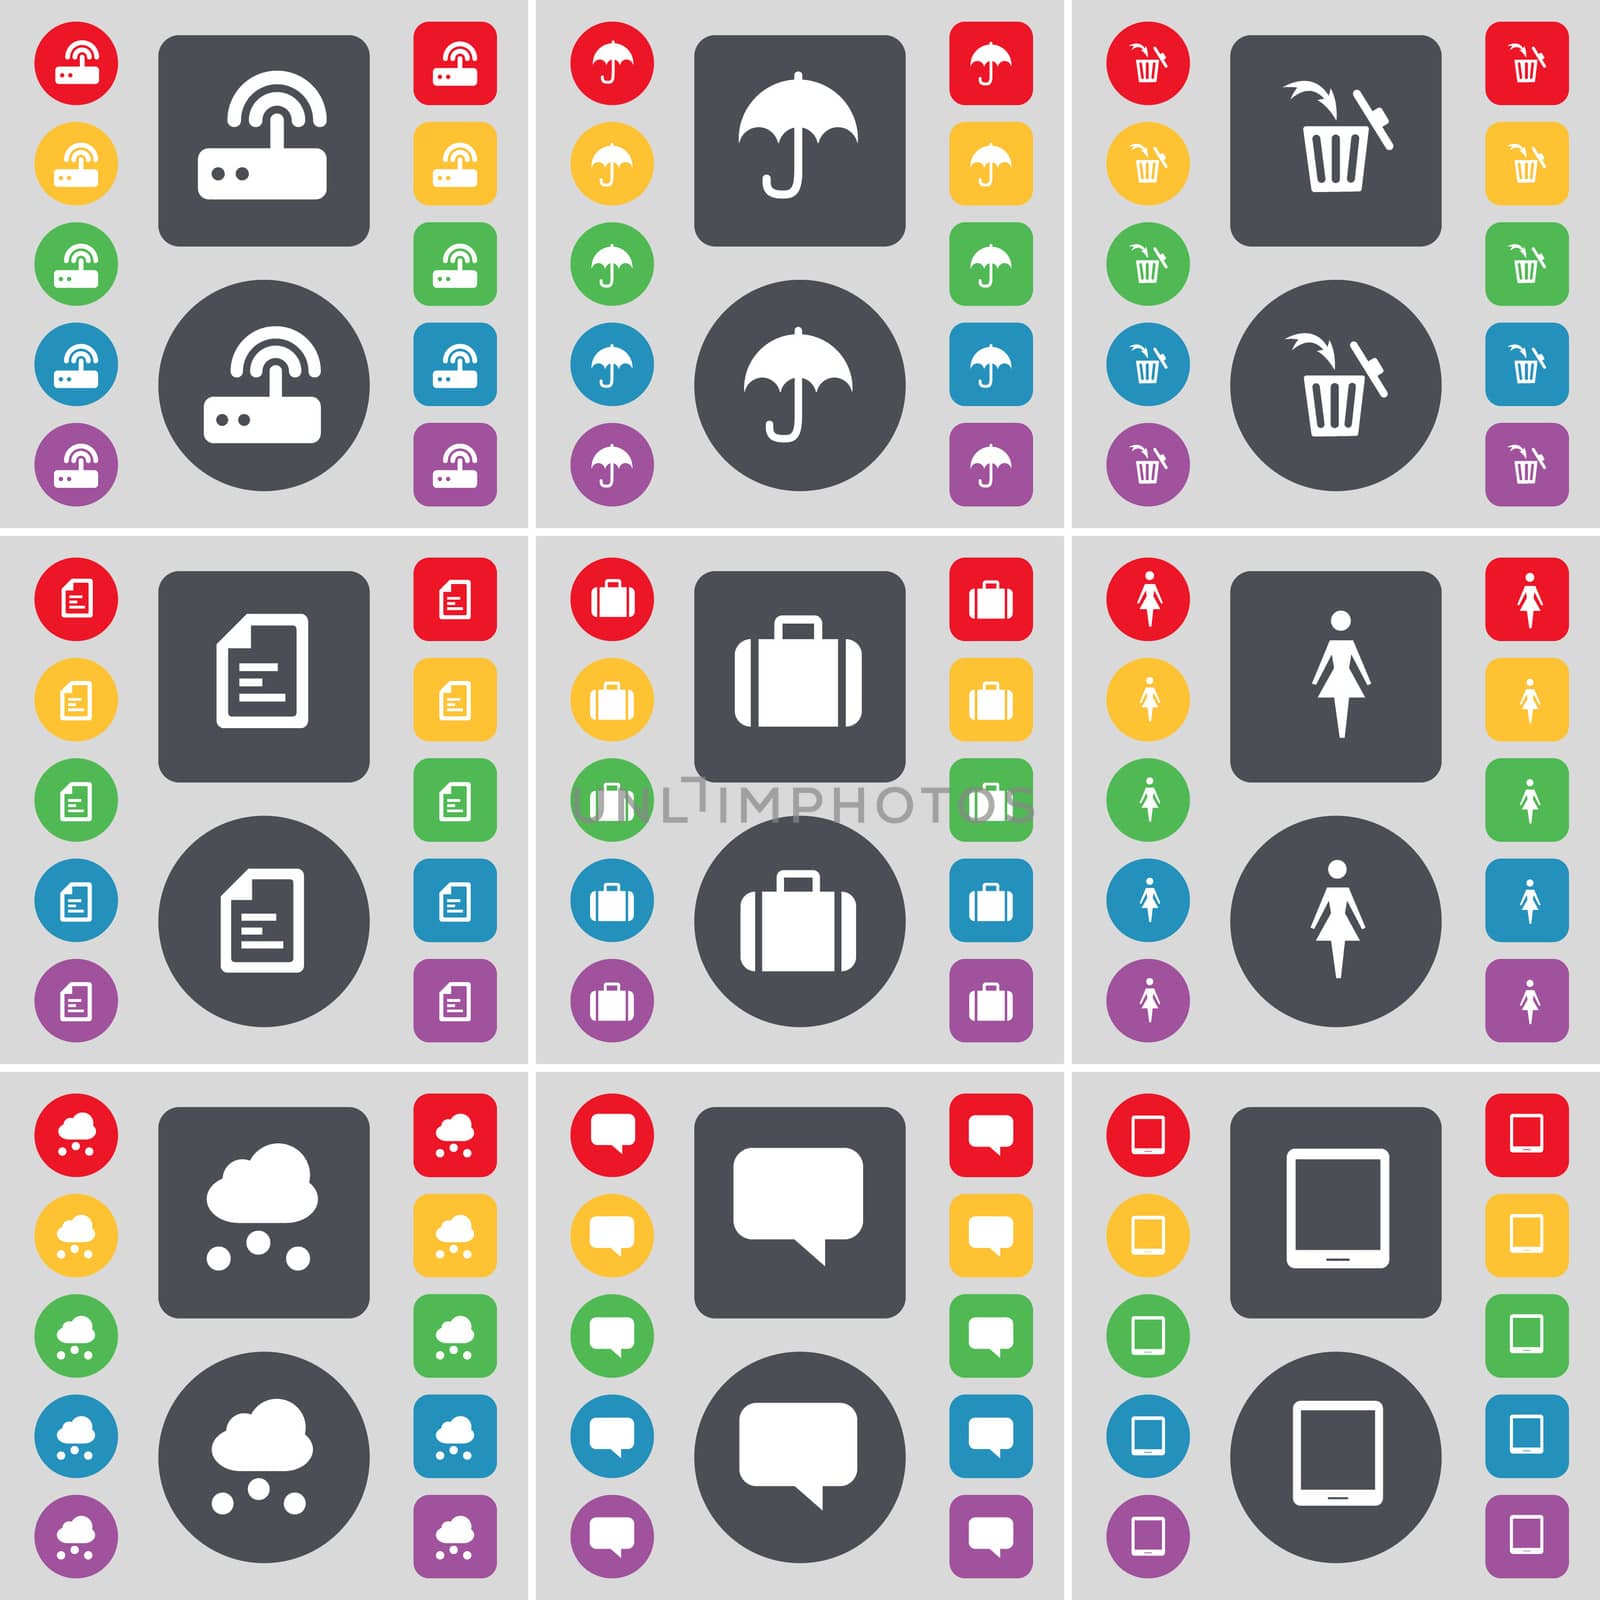 Router, Umbrella, Trash can, Text file, Suitcase, Silhouette, Cloud, Chat bubble, Tablet PC icon symbol. A large set of flat, colored buttons for your design. illustration